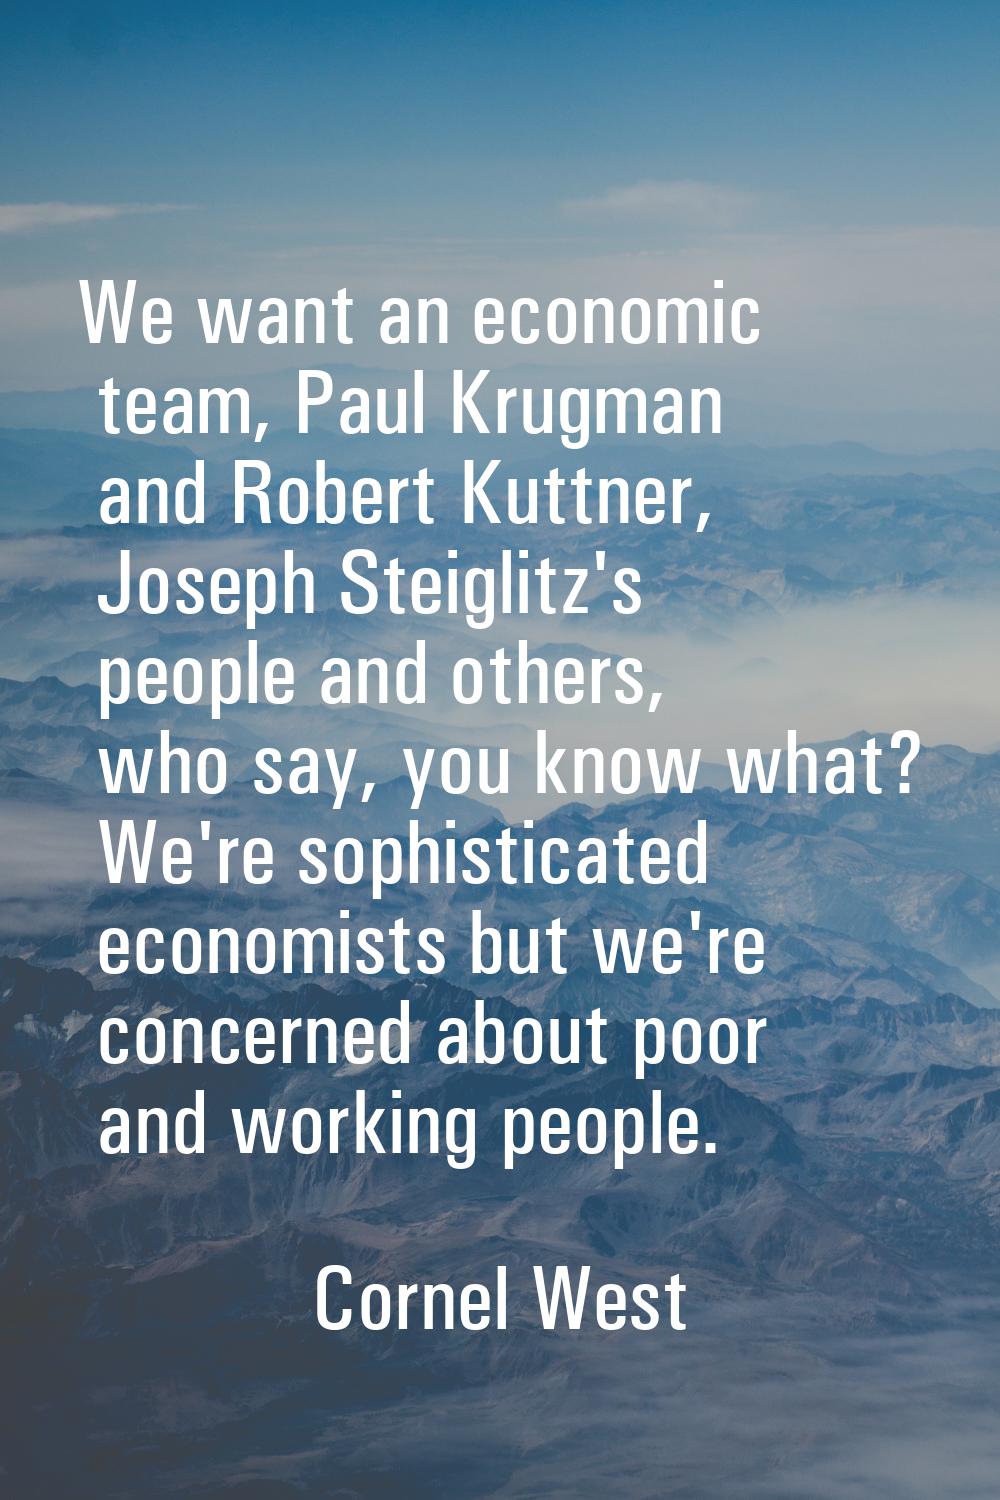 We want an economic team, Paul Krugman and Robert Kuttner, Joseph Steiglitz's people and others, wh